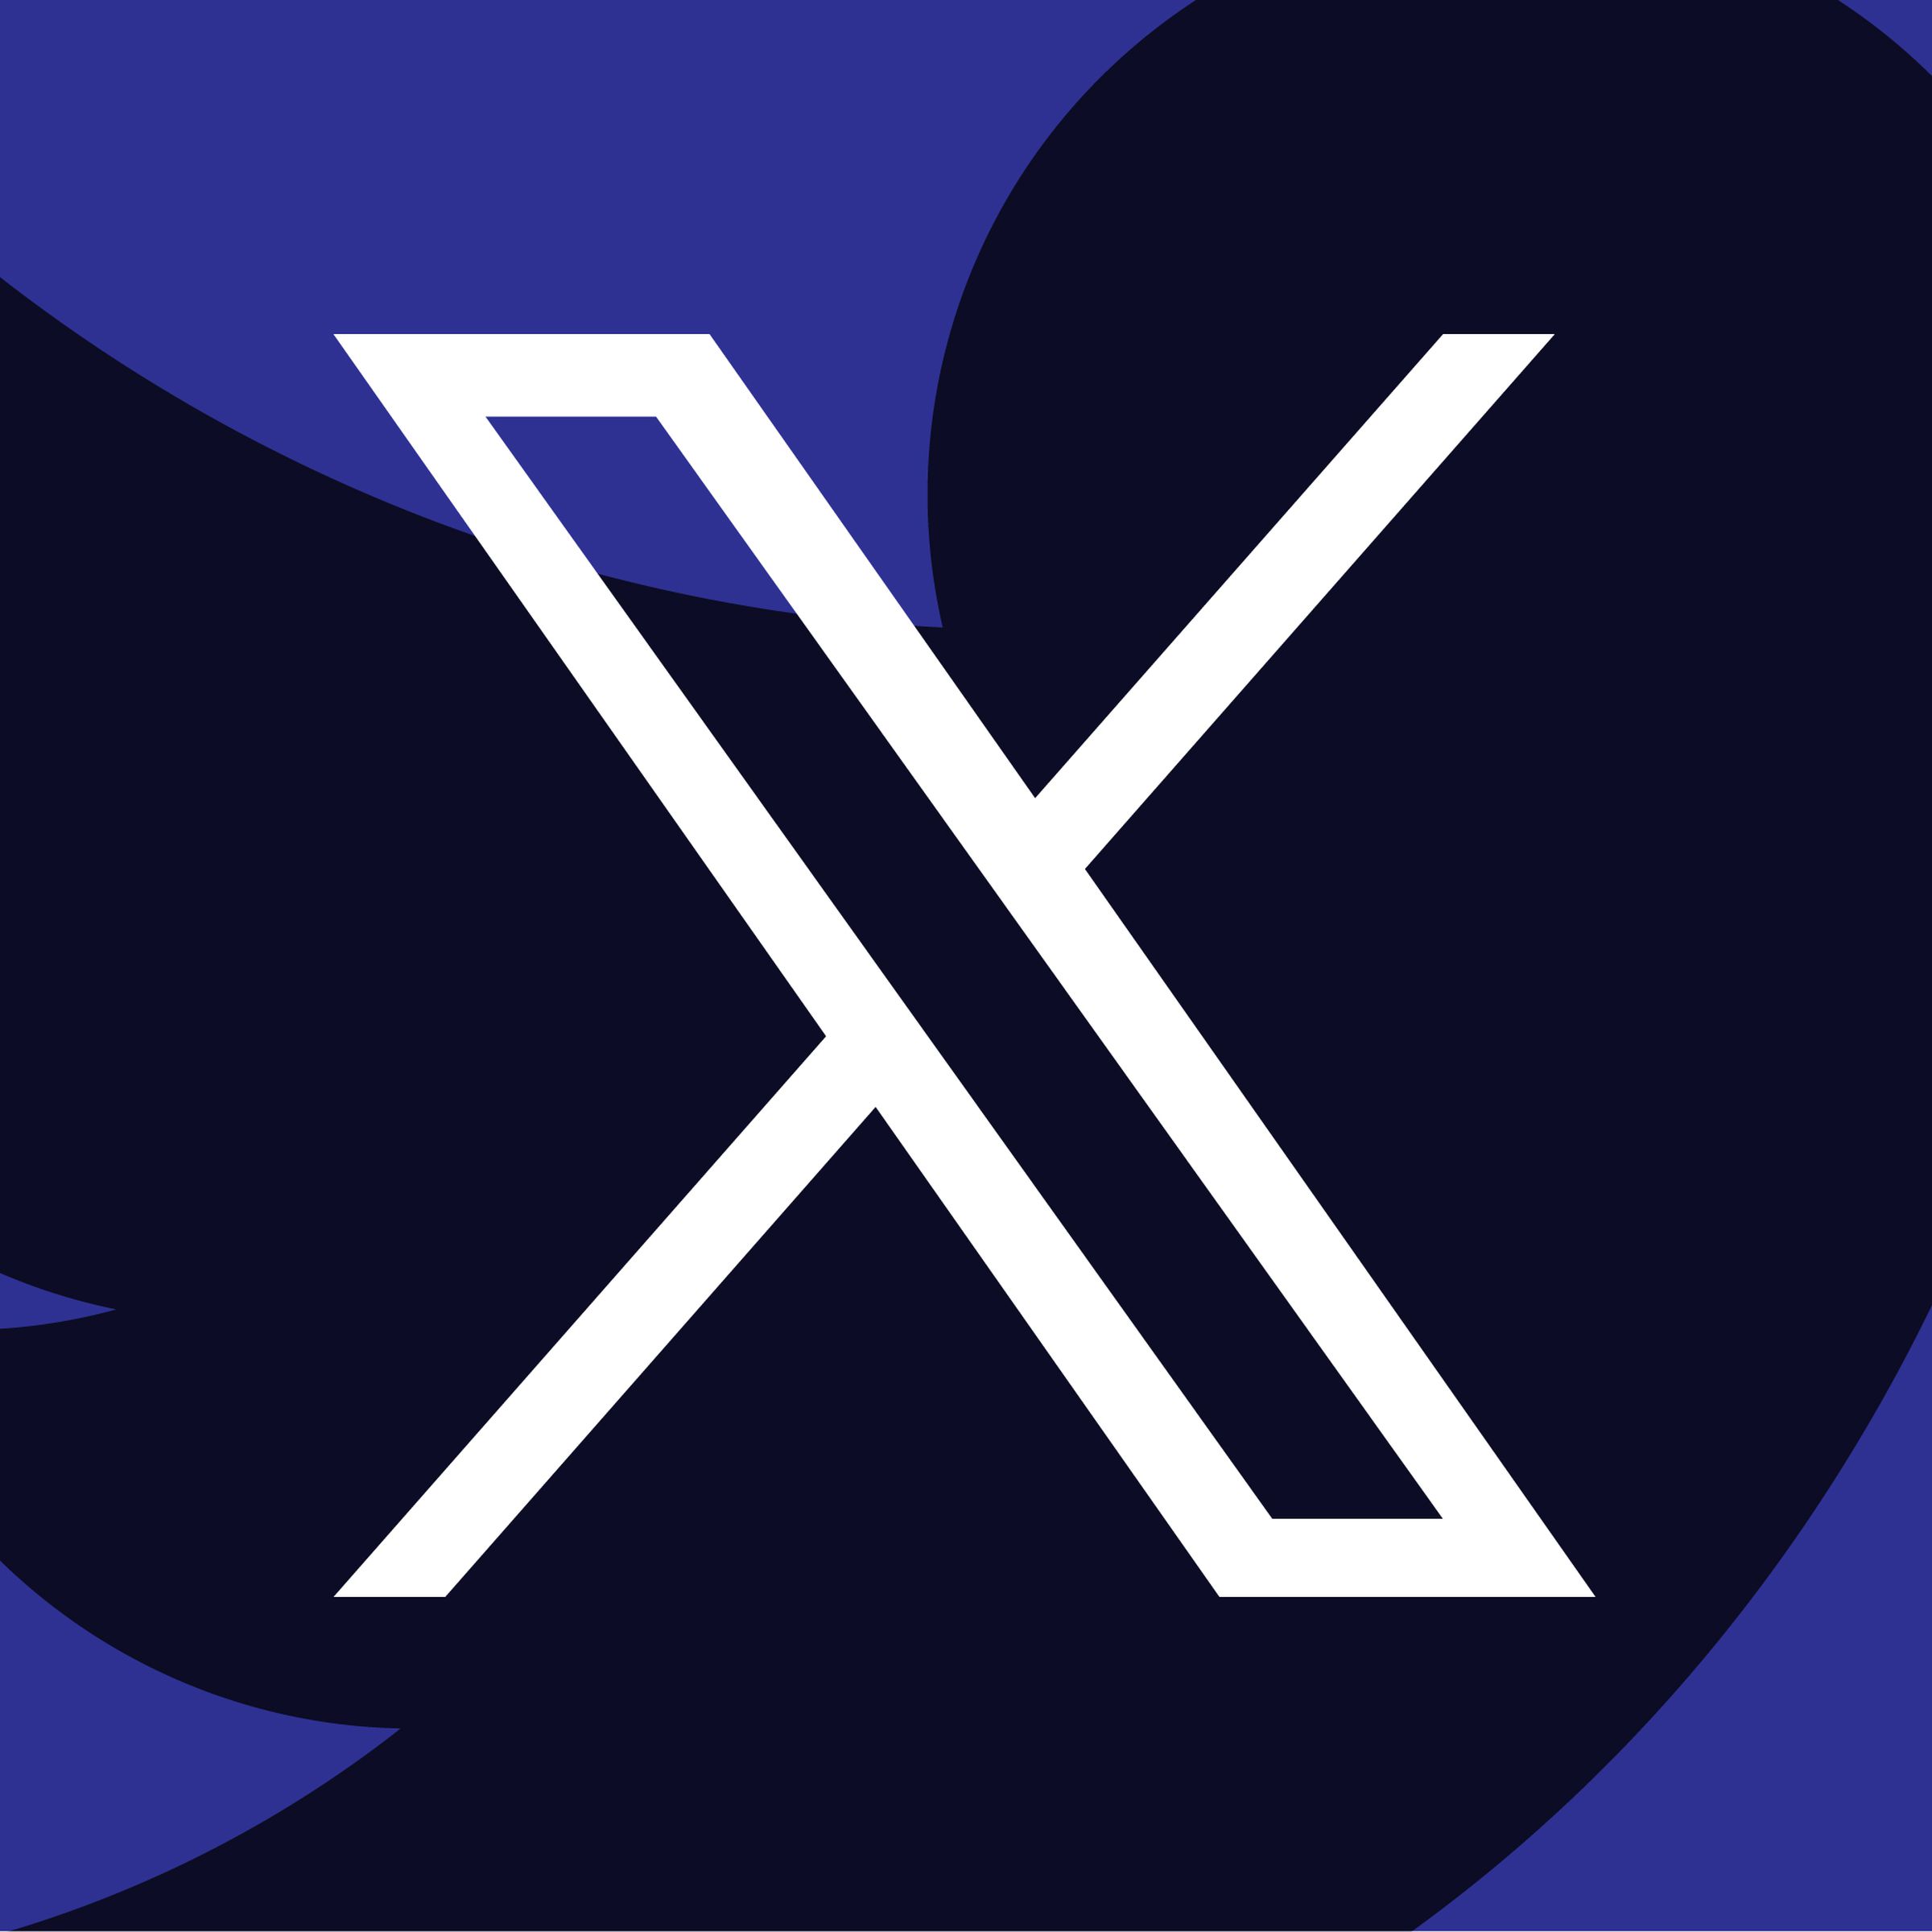 An image showing the X logo superimposed on the Twitter logo